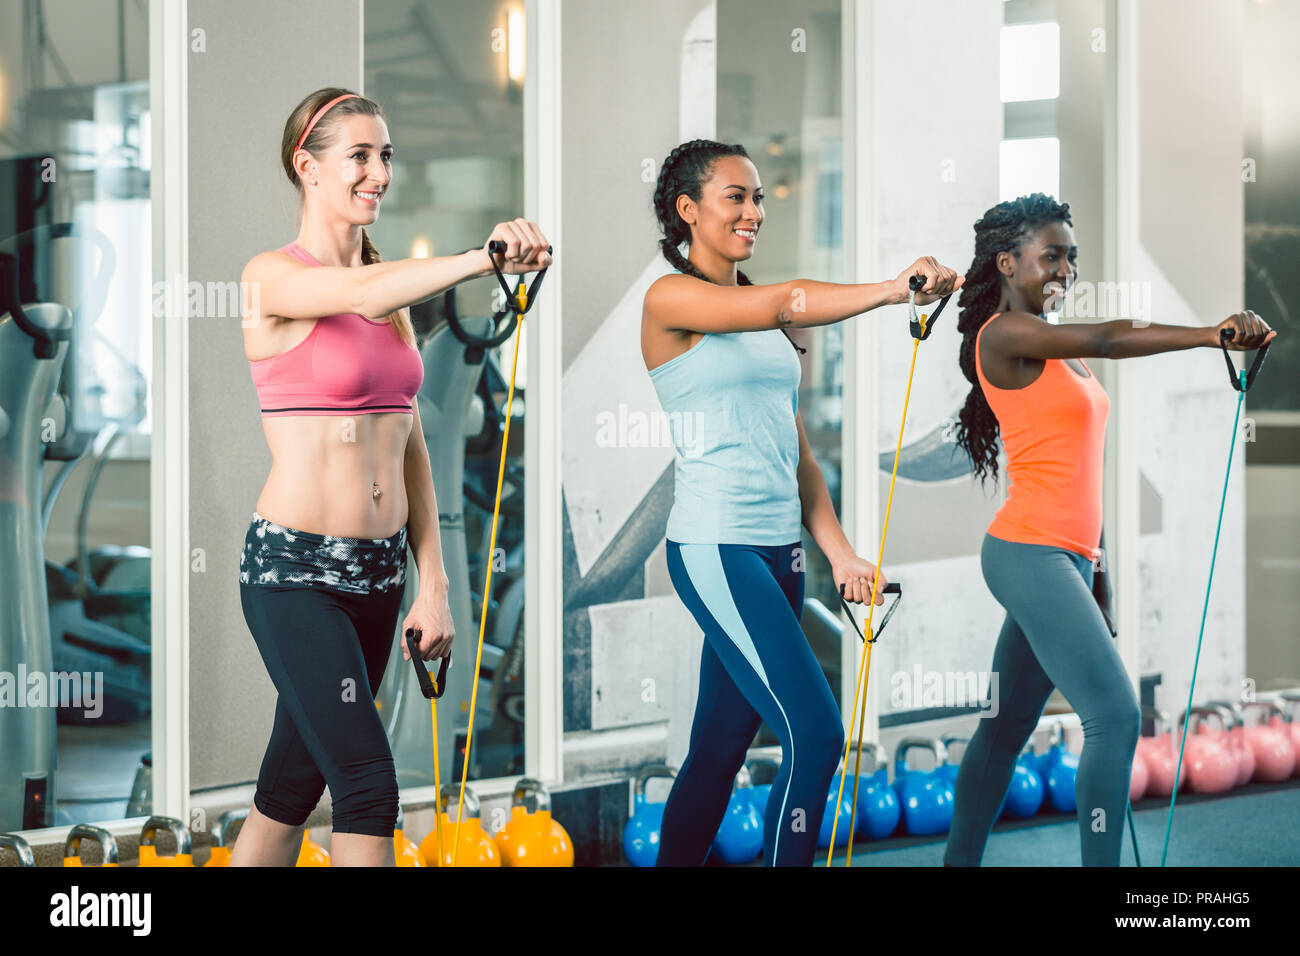 Full length of three fit women exercising with resistance bands  Stock Photo